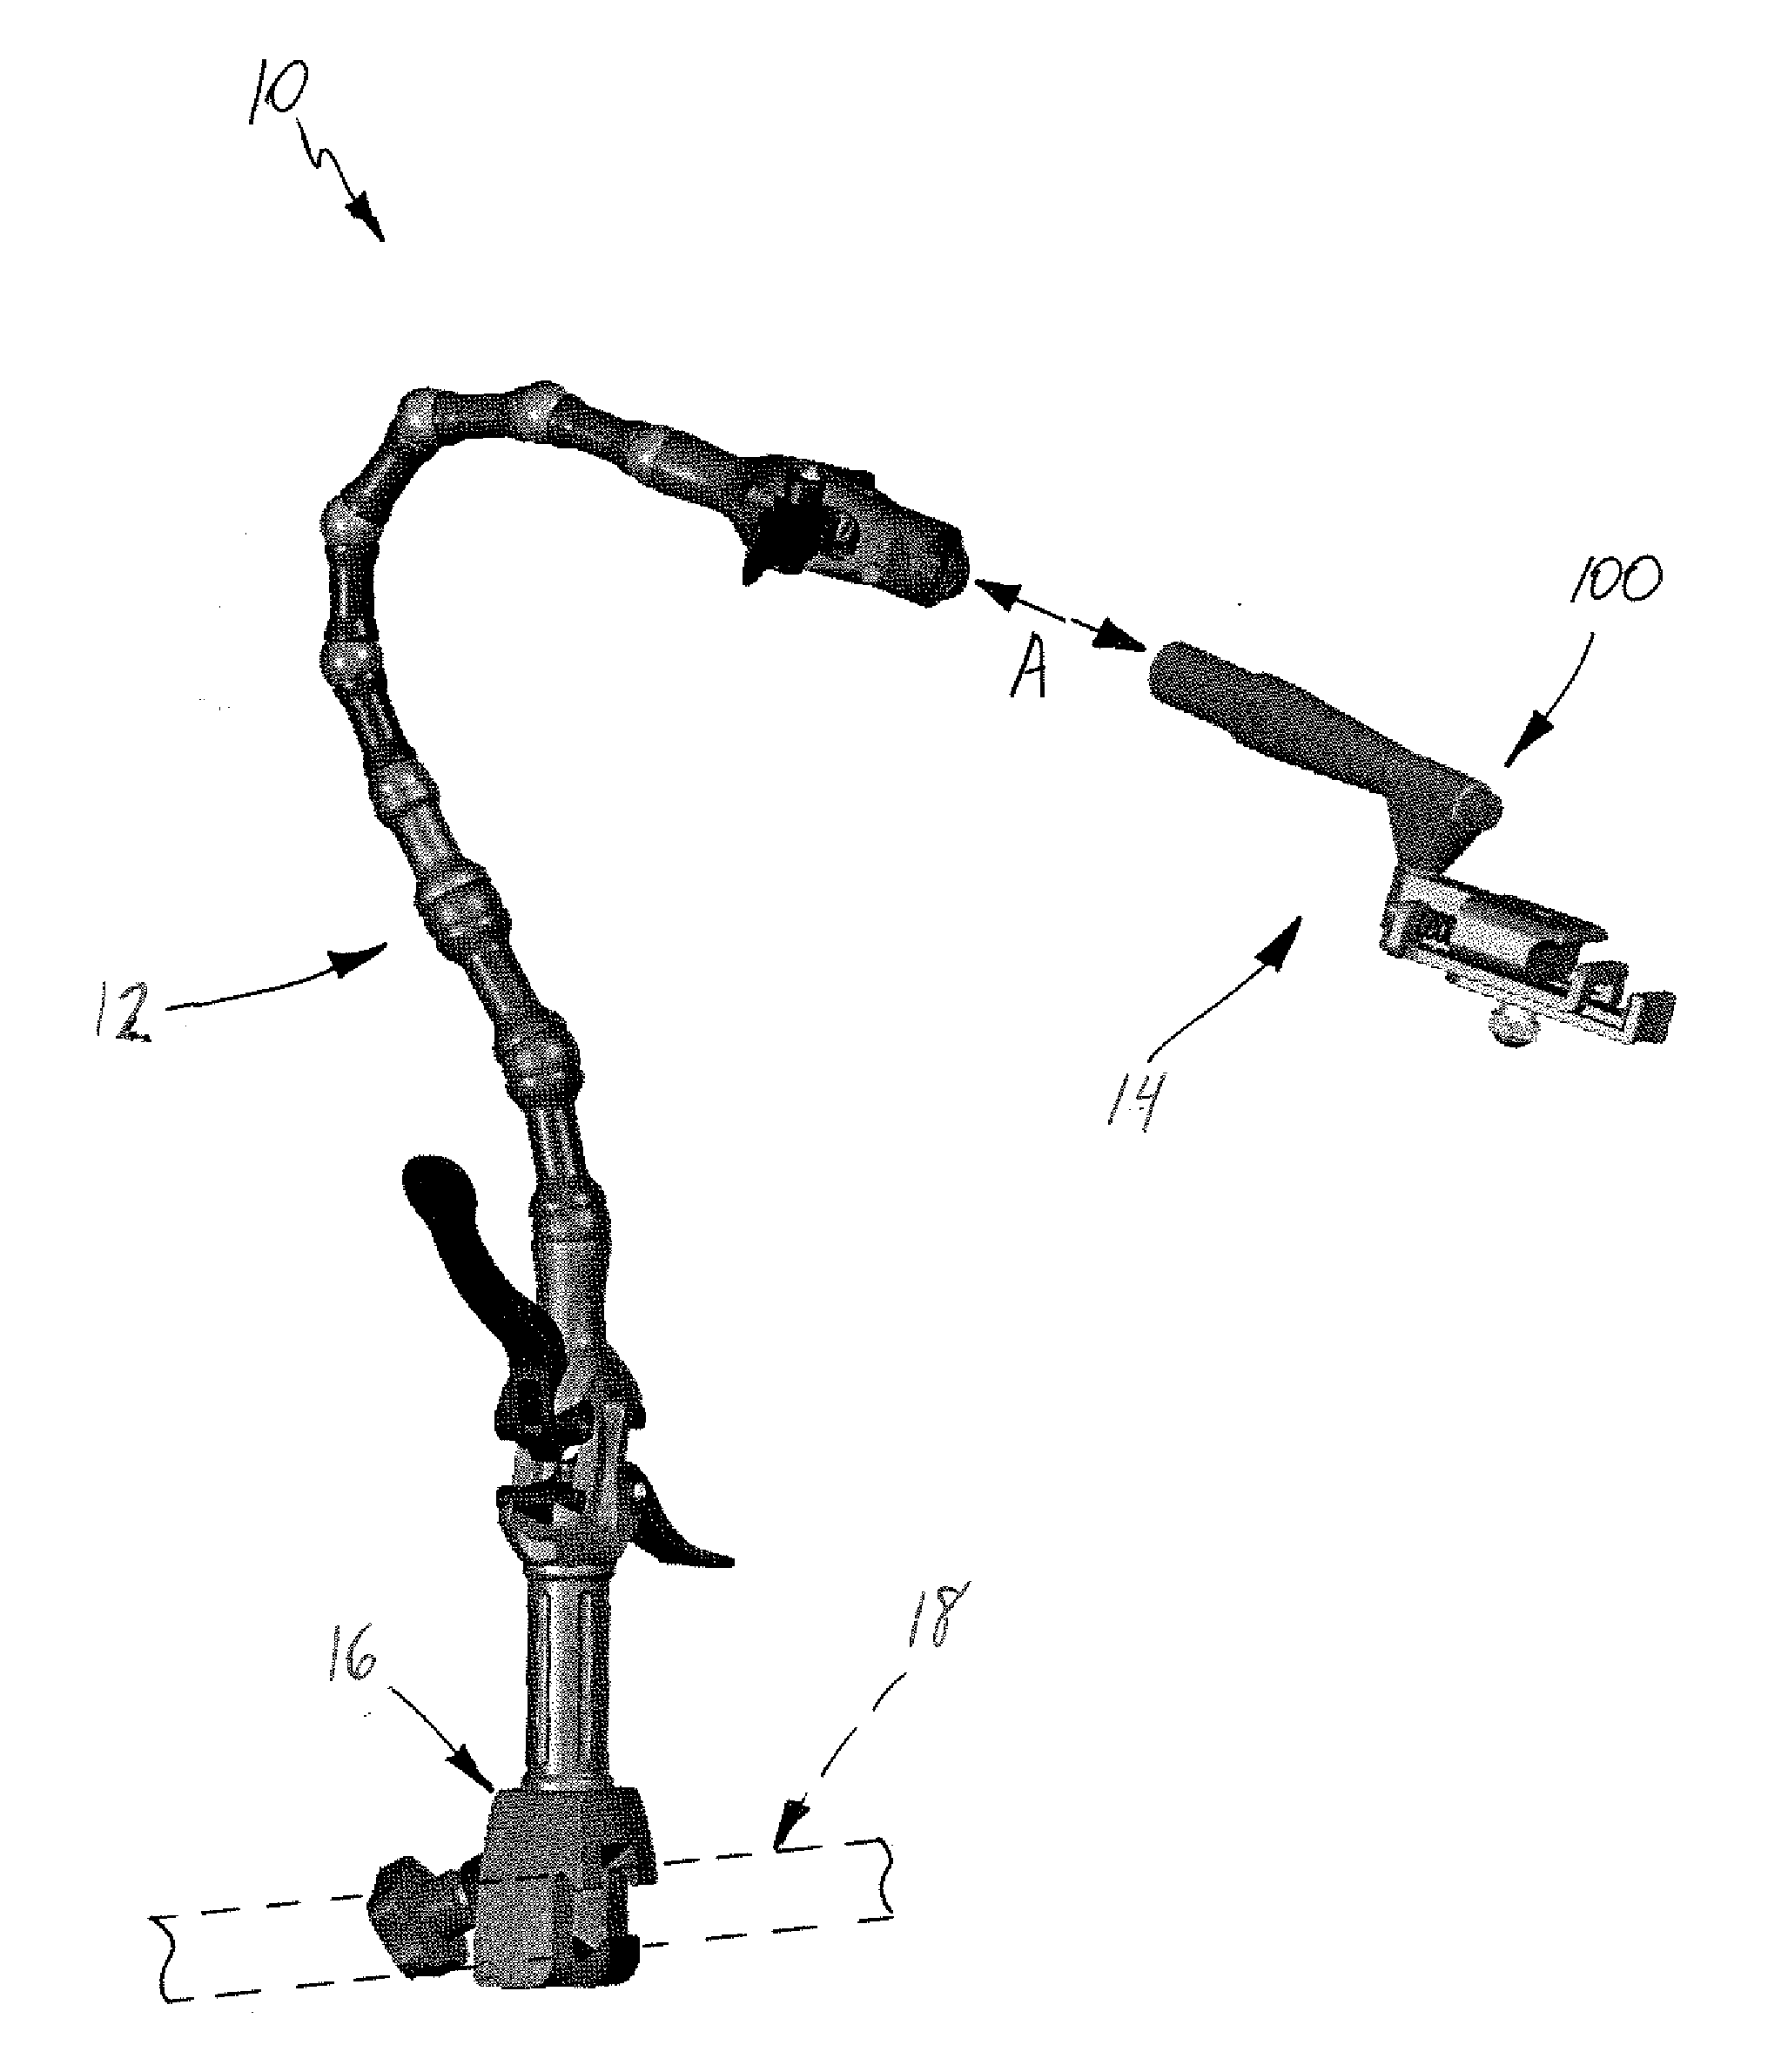 System and method for positioning a laparoscopic device